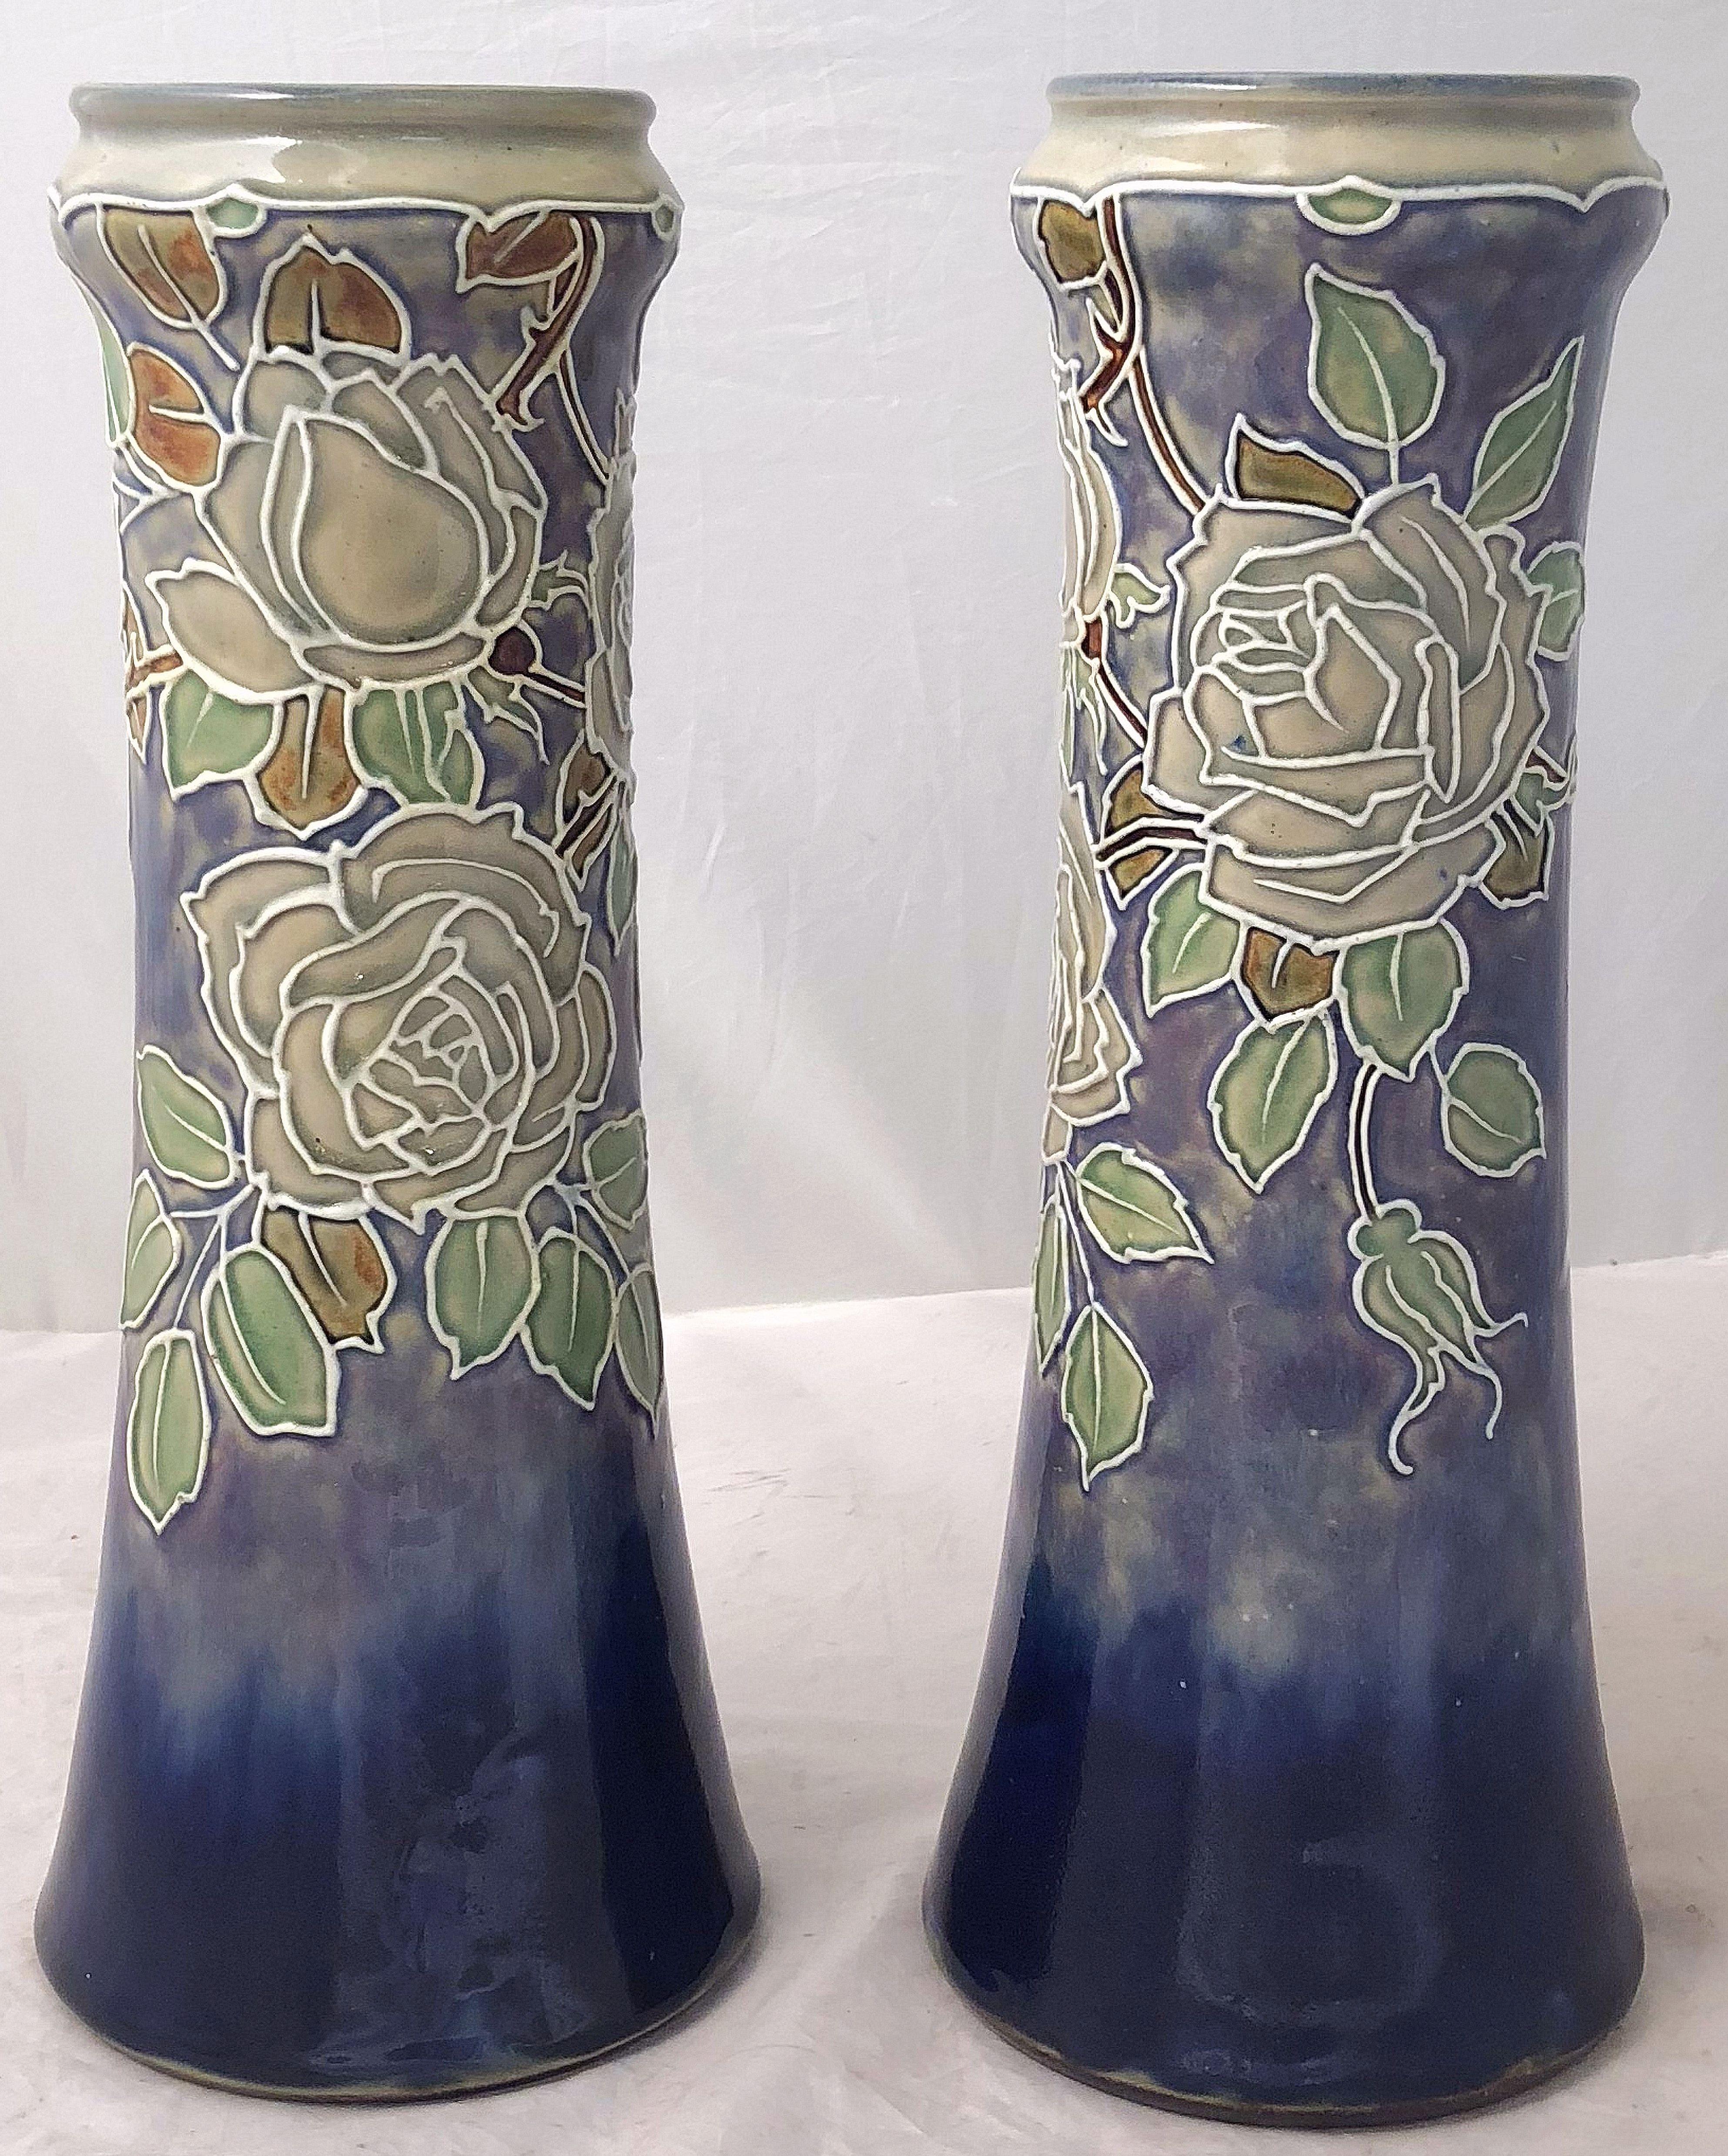 20th Century Pair of Royal Doulton Vases from the Arts & Crafts Period, 'Priced as a Pair' For Sale